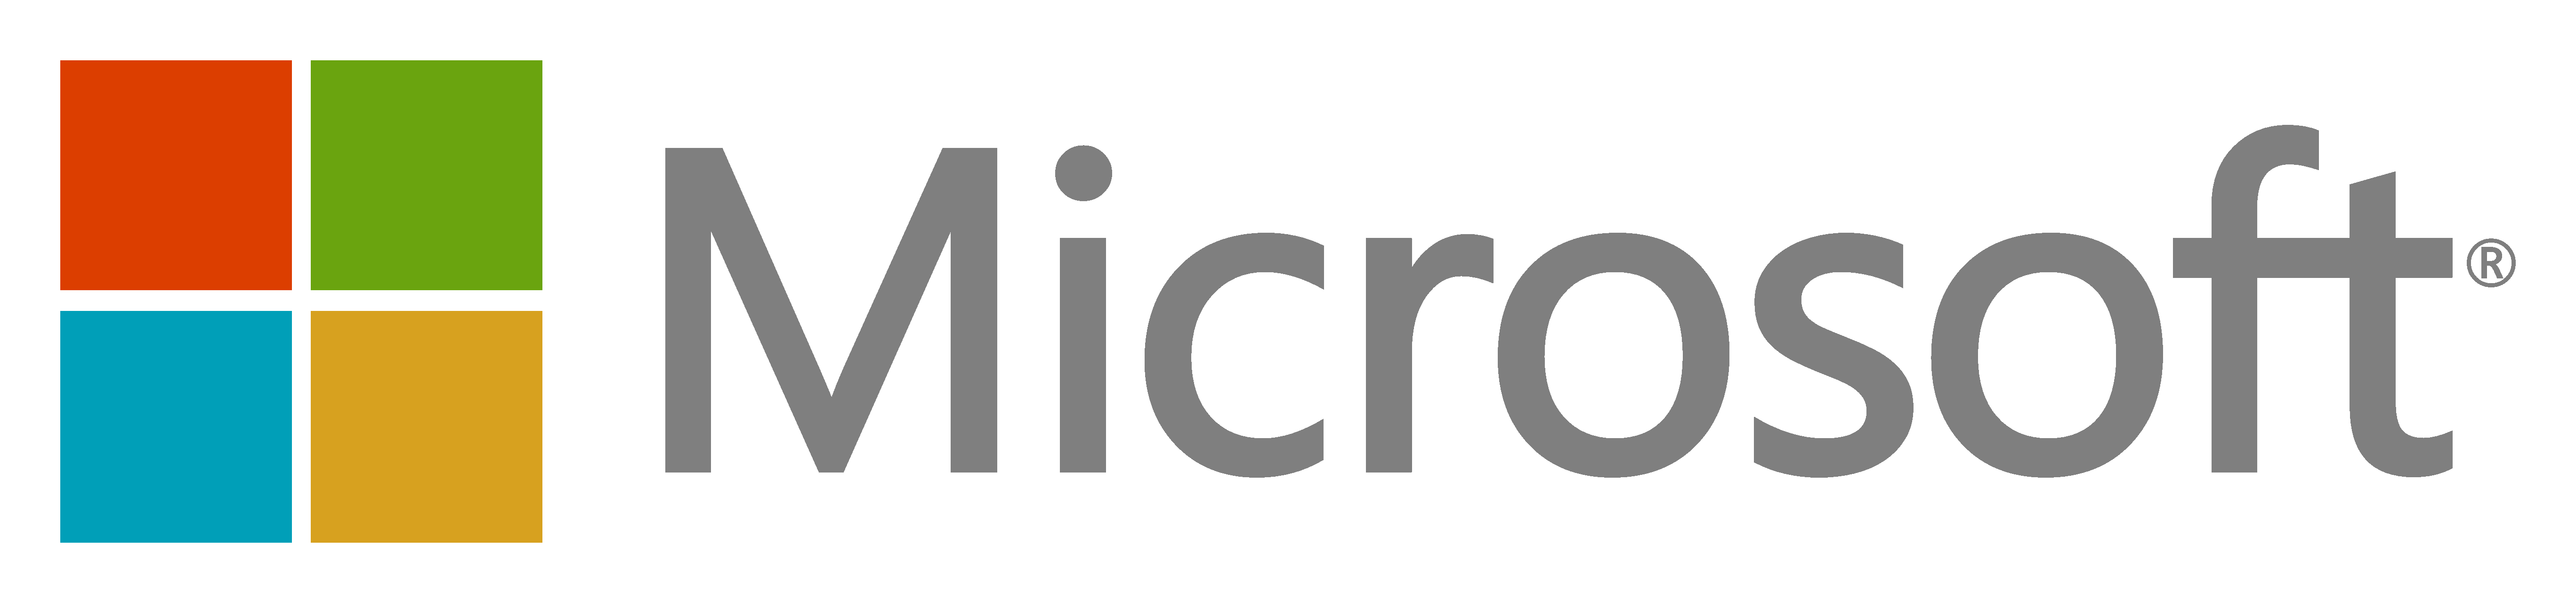 picture microsoft logo png #42723